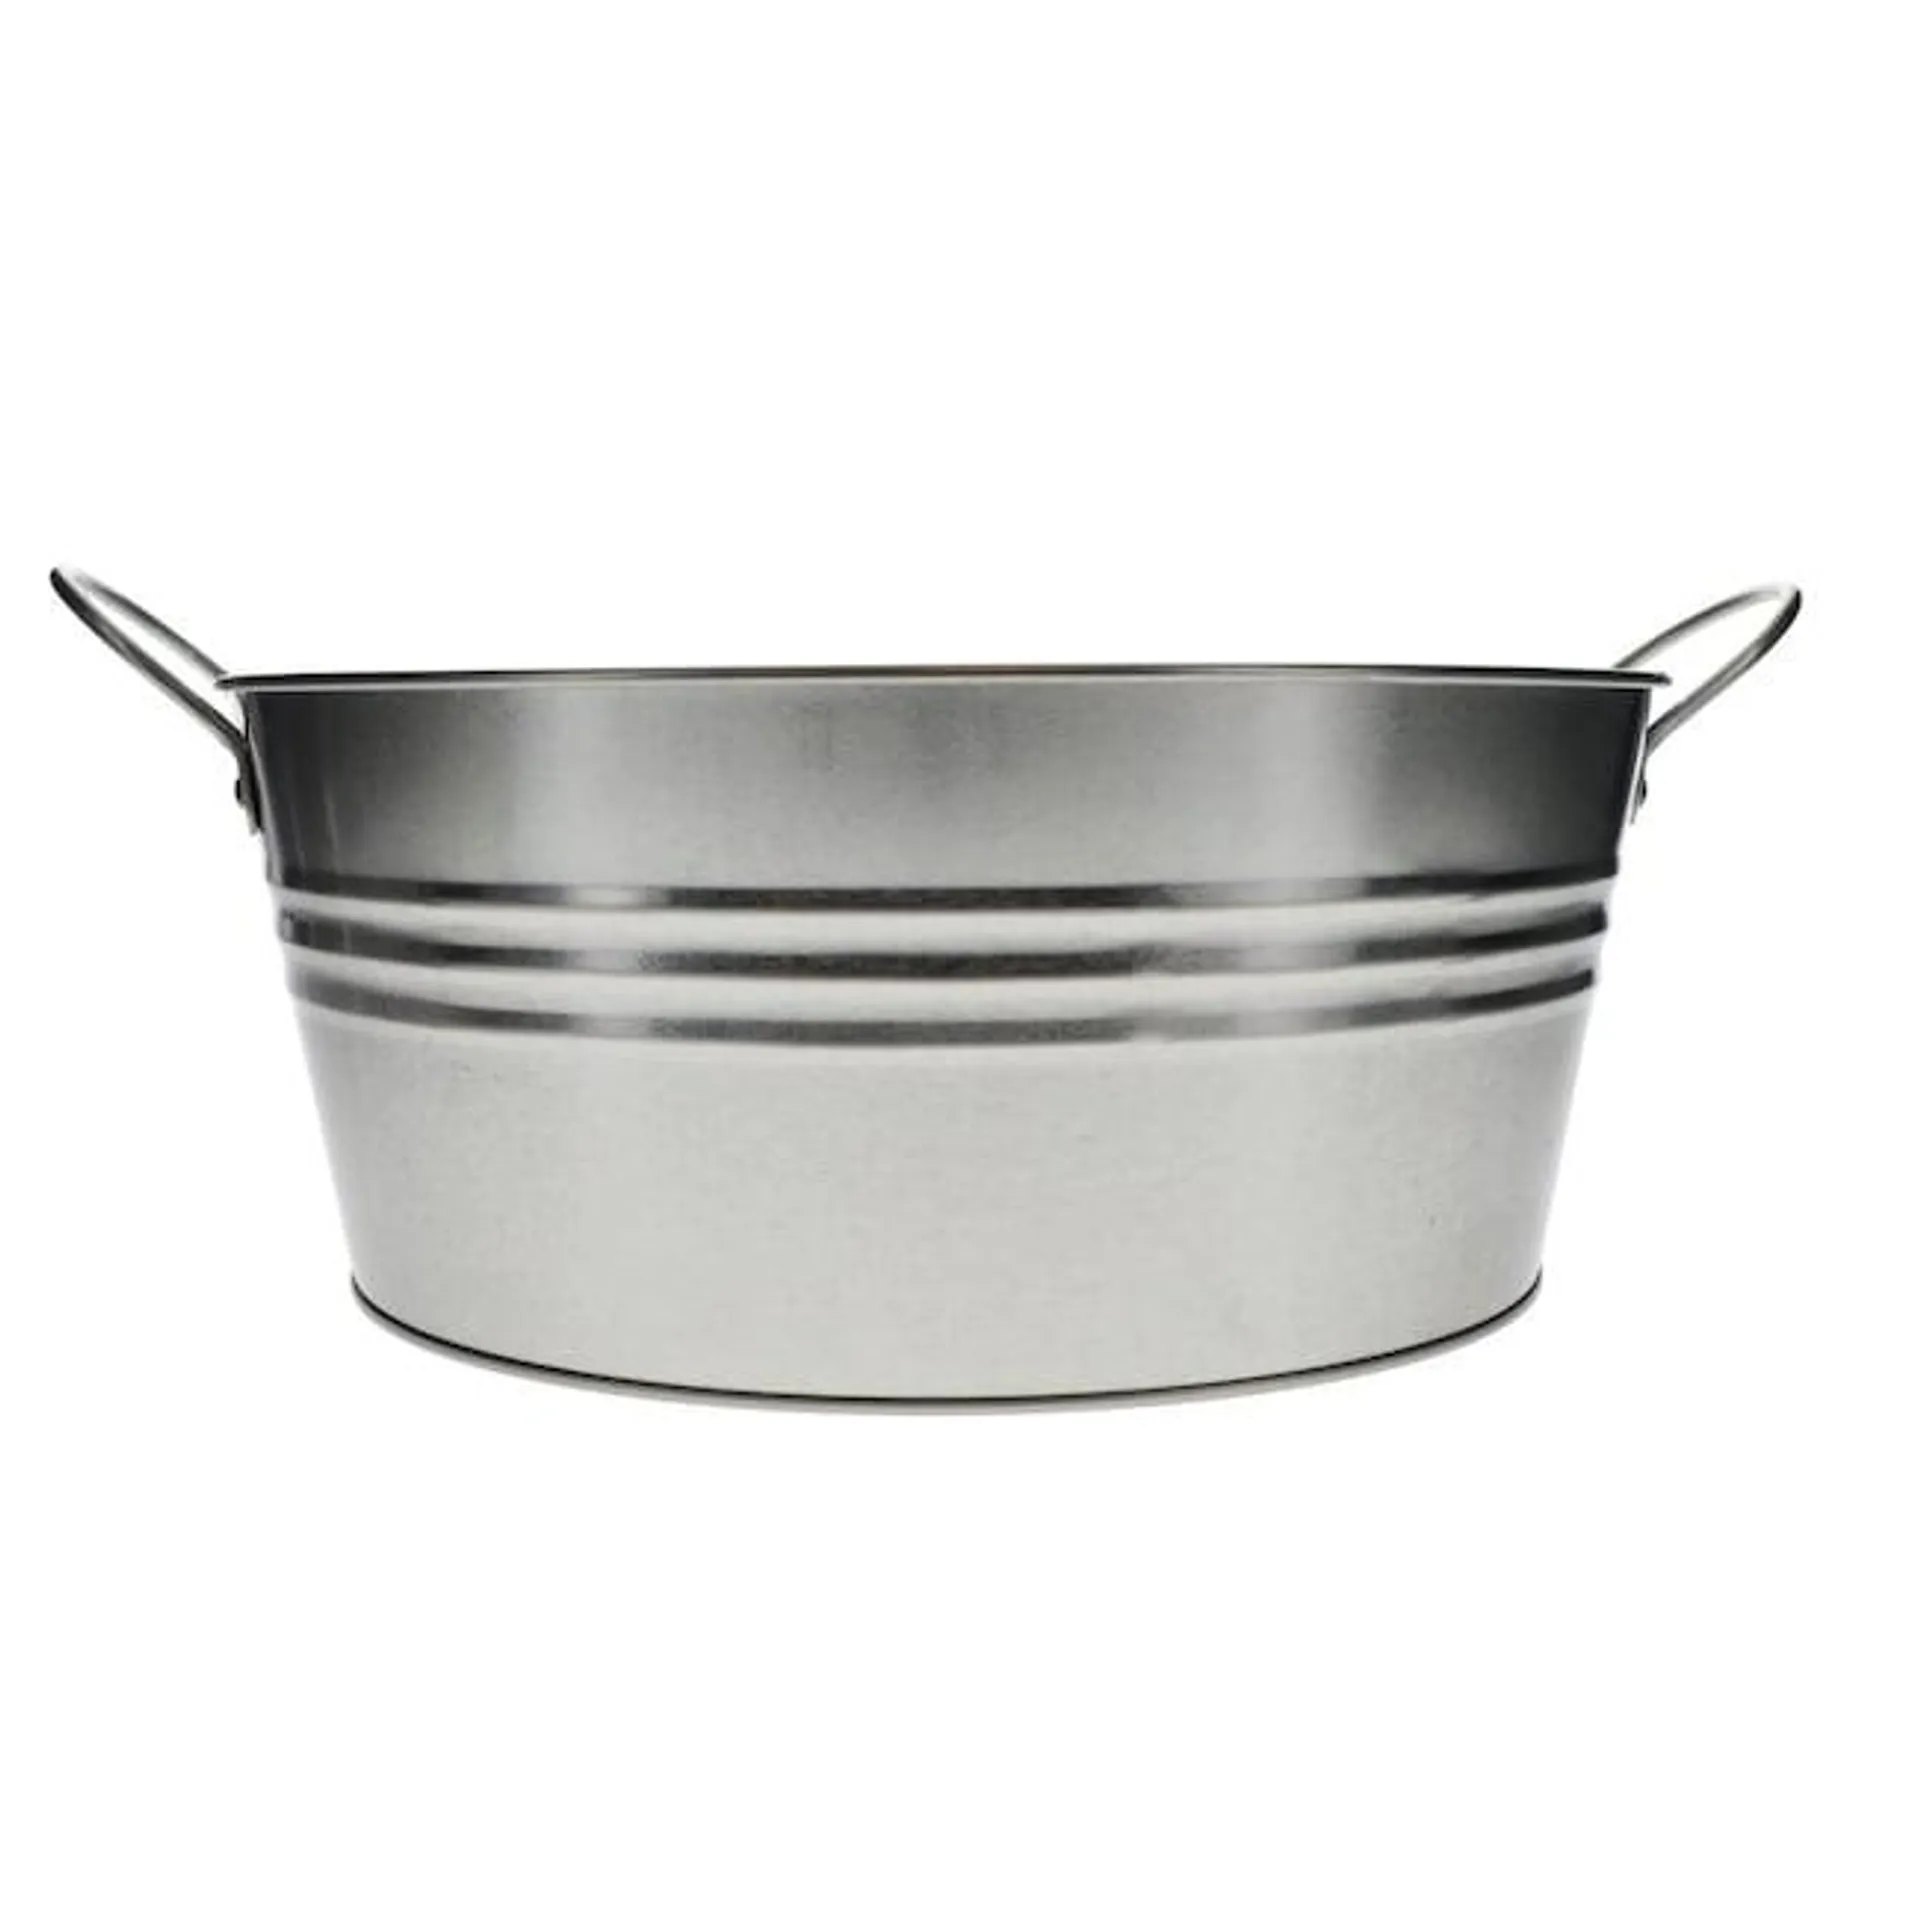 Oval Metal Buckets with Ridge Accents and Handles, 11x13x5-in.